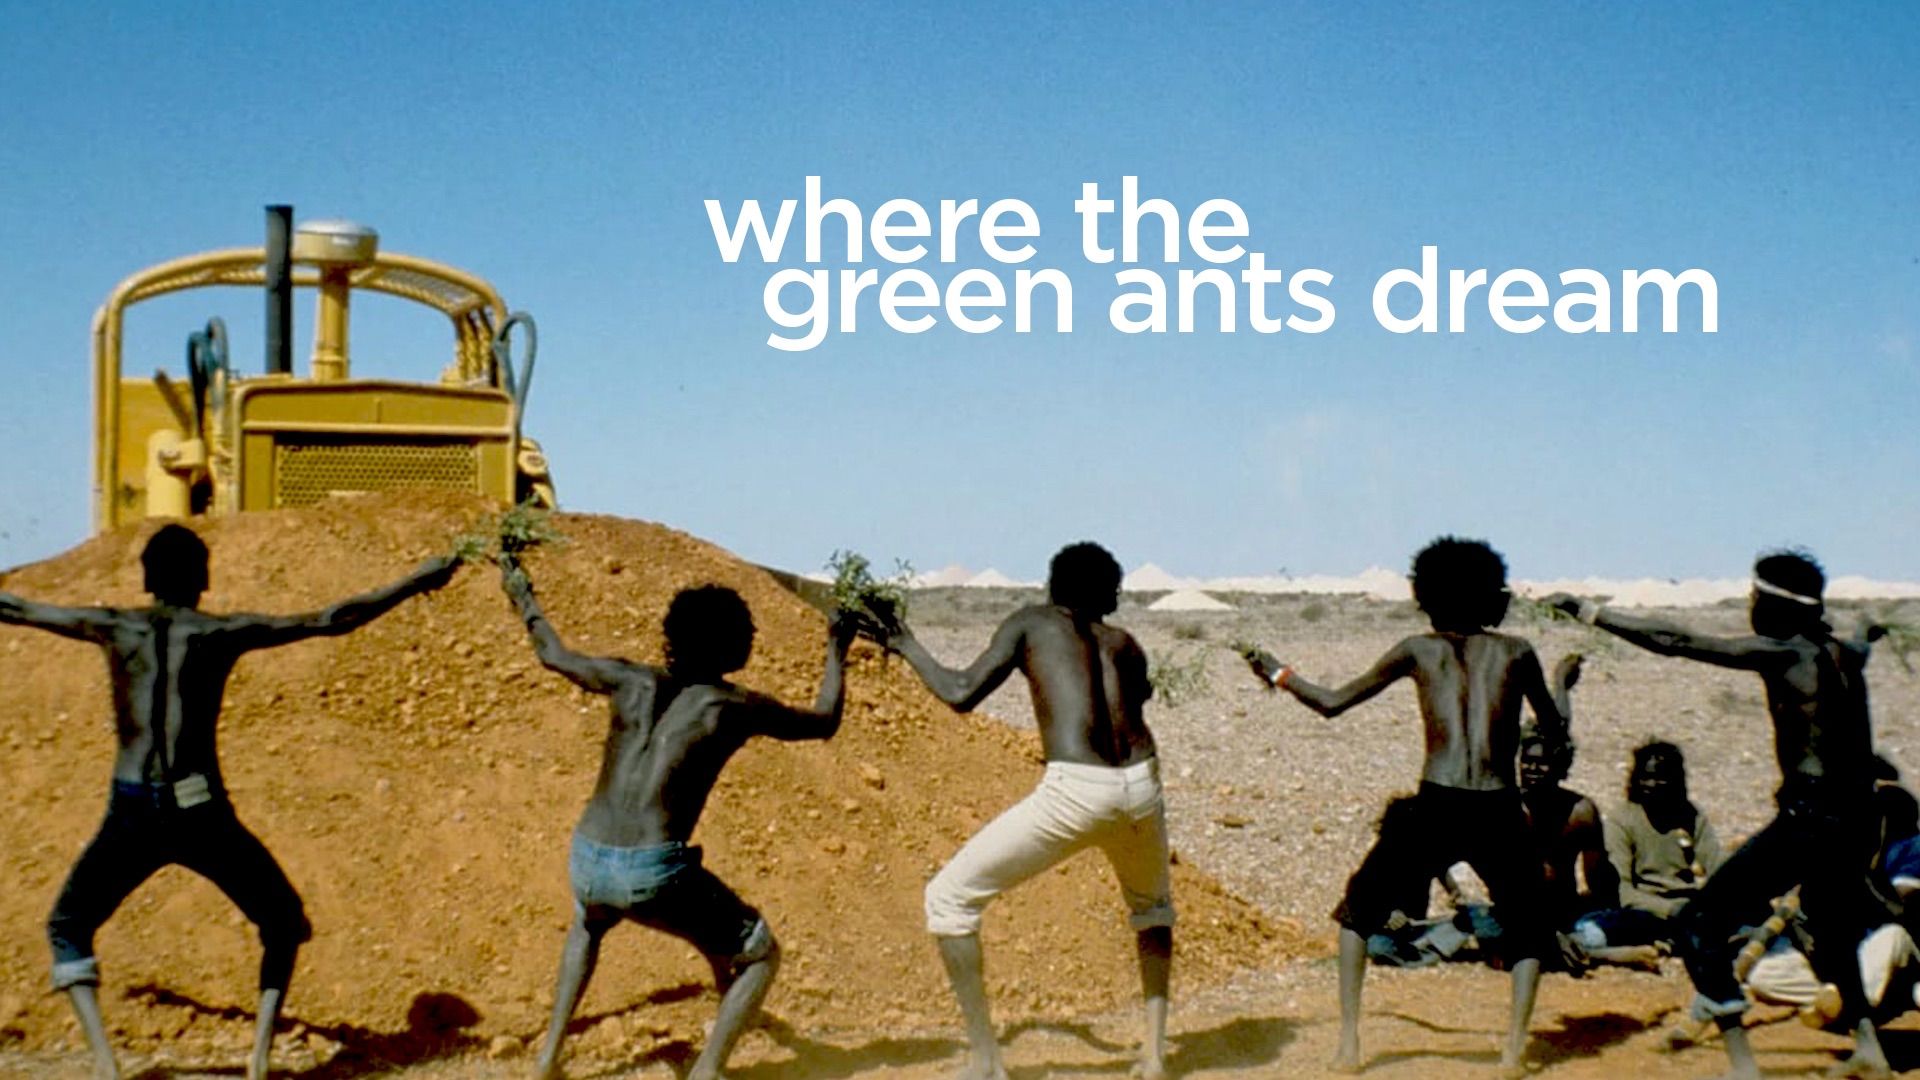 Where the Green Ants Dream Backdrop